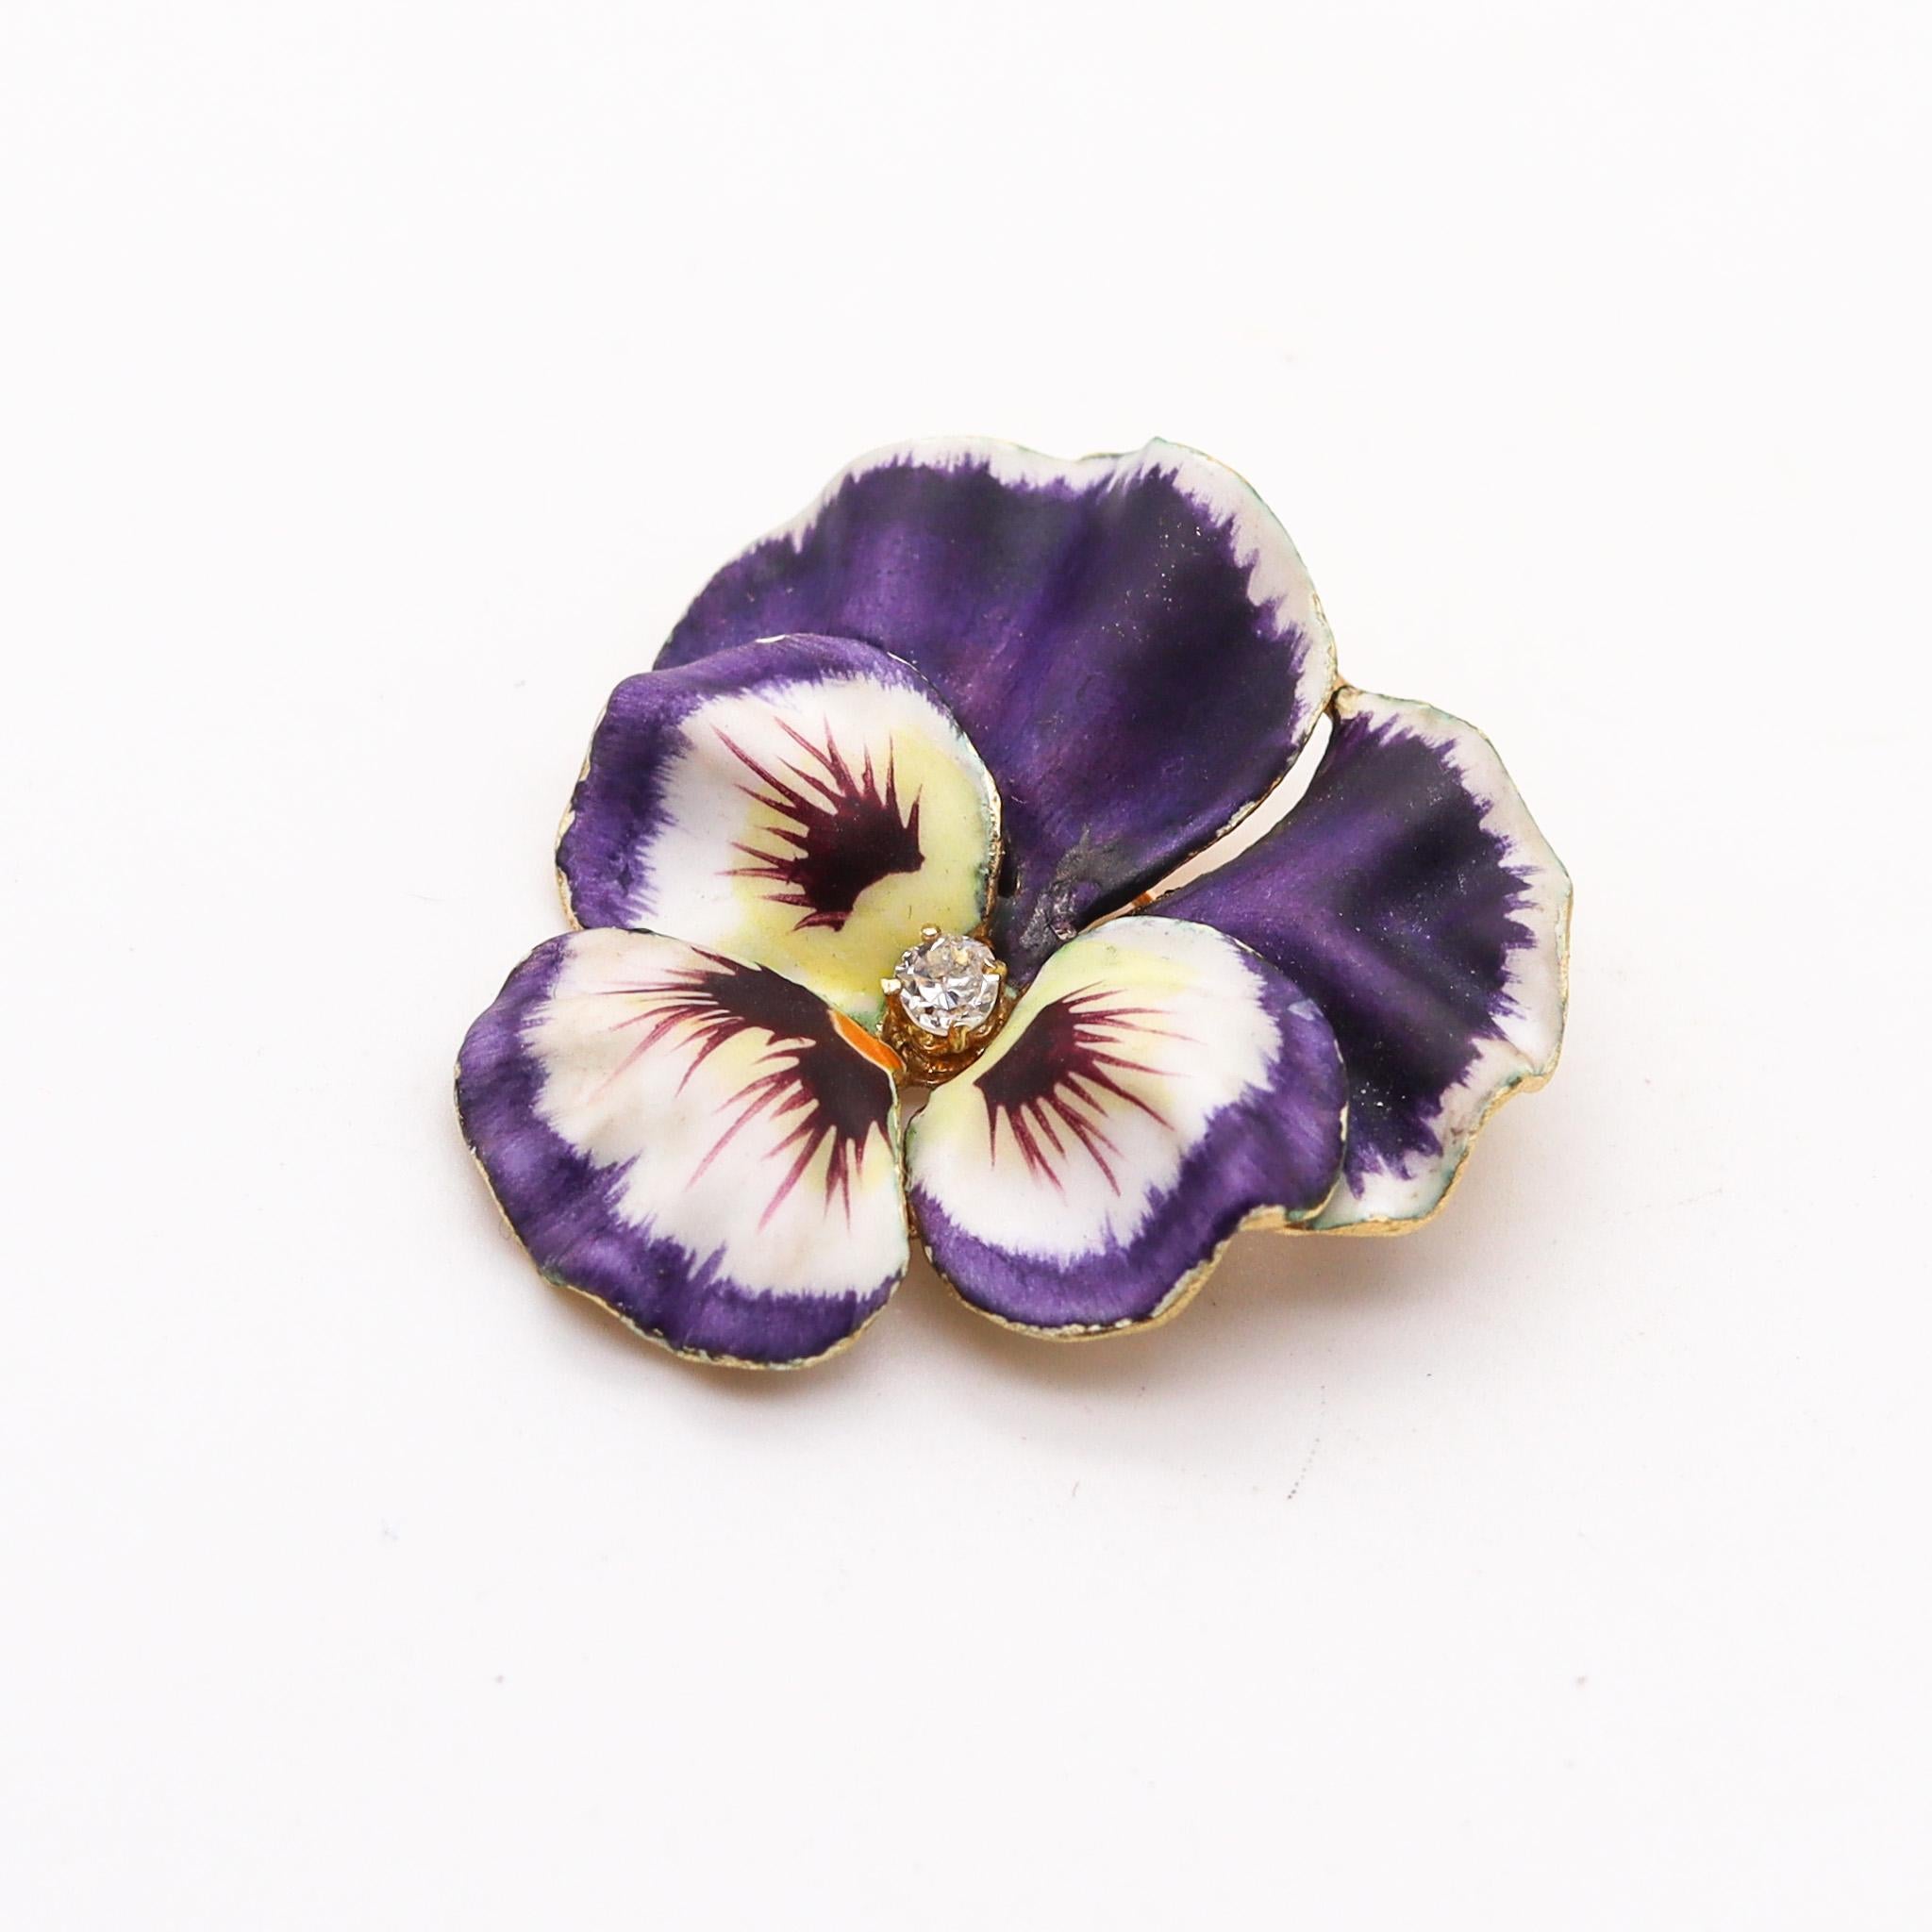 Edwardian flower pendant-brooch designed by Crane & Theurer.

Beautiful pendant-brooch, created in America during the Edwardian and the Art Nouveau periods, back in the 1905. This versatile piece has been designed by the jewelry company of Crane &